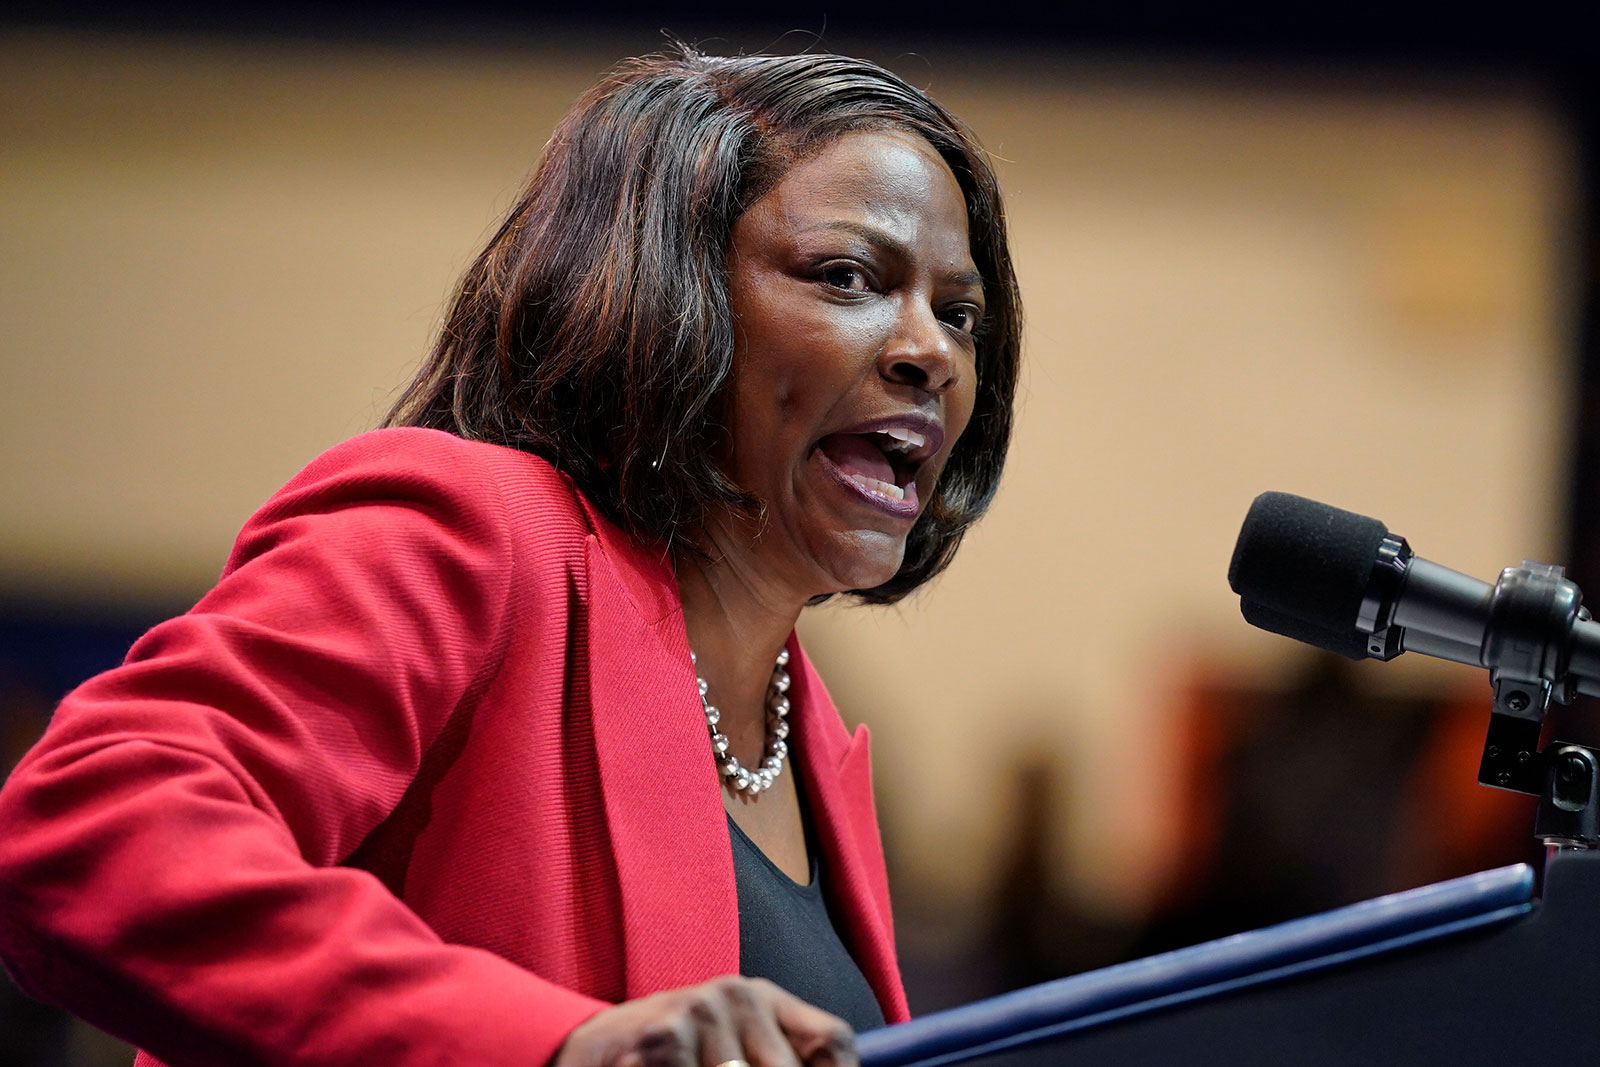 Rep. Val Demings speaks before President Joe Biden at a campaign rally Tuesday evening in Miami Gardens, Florida.